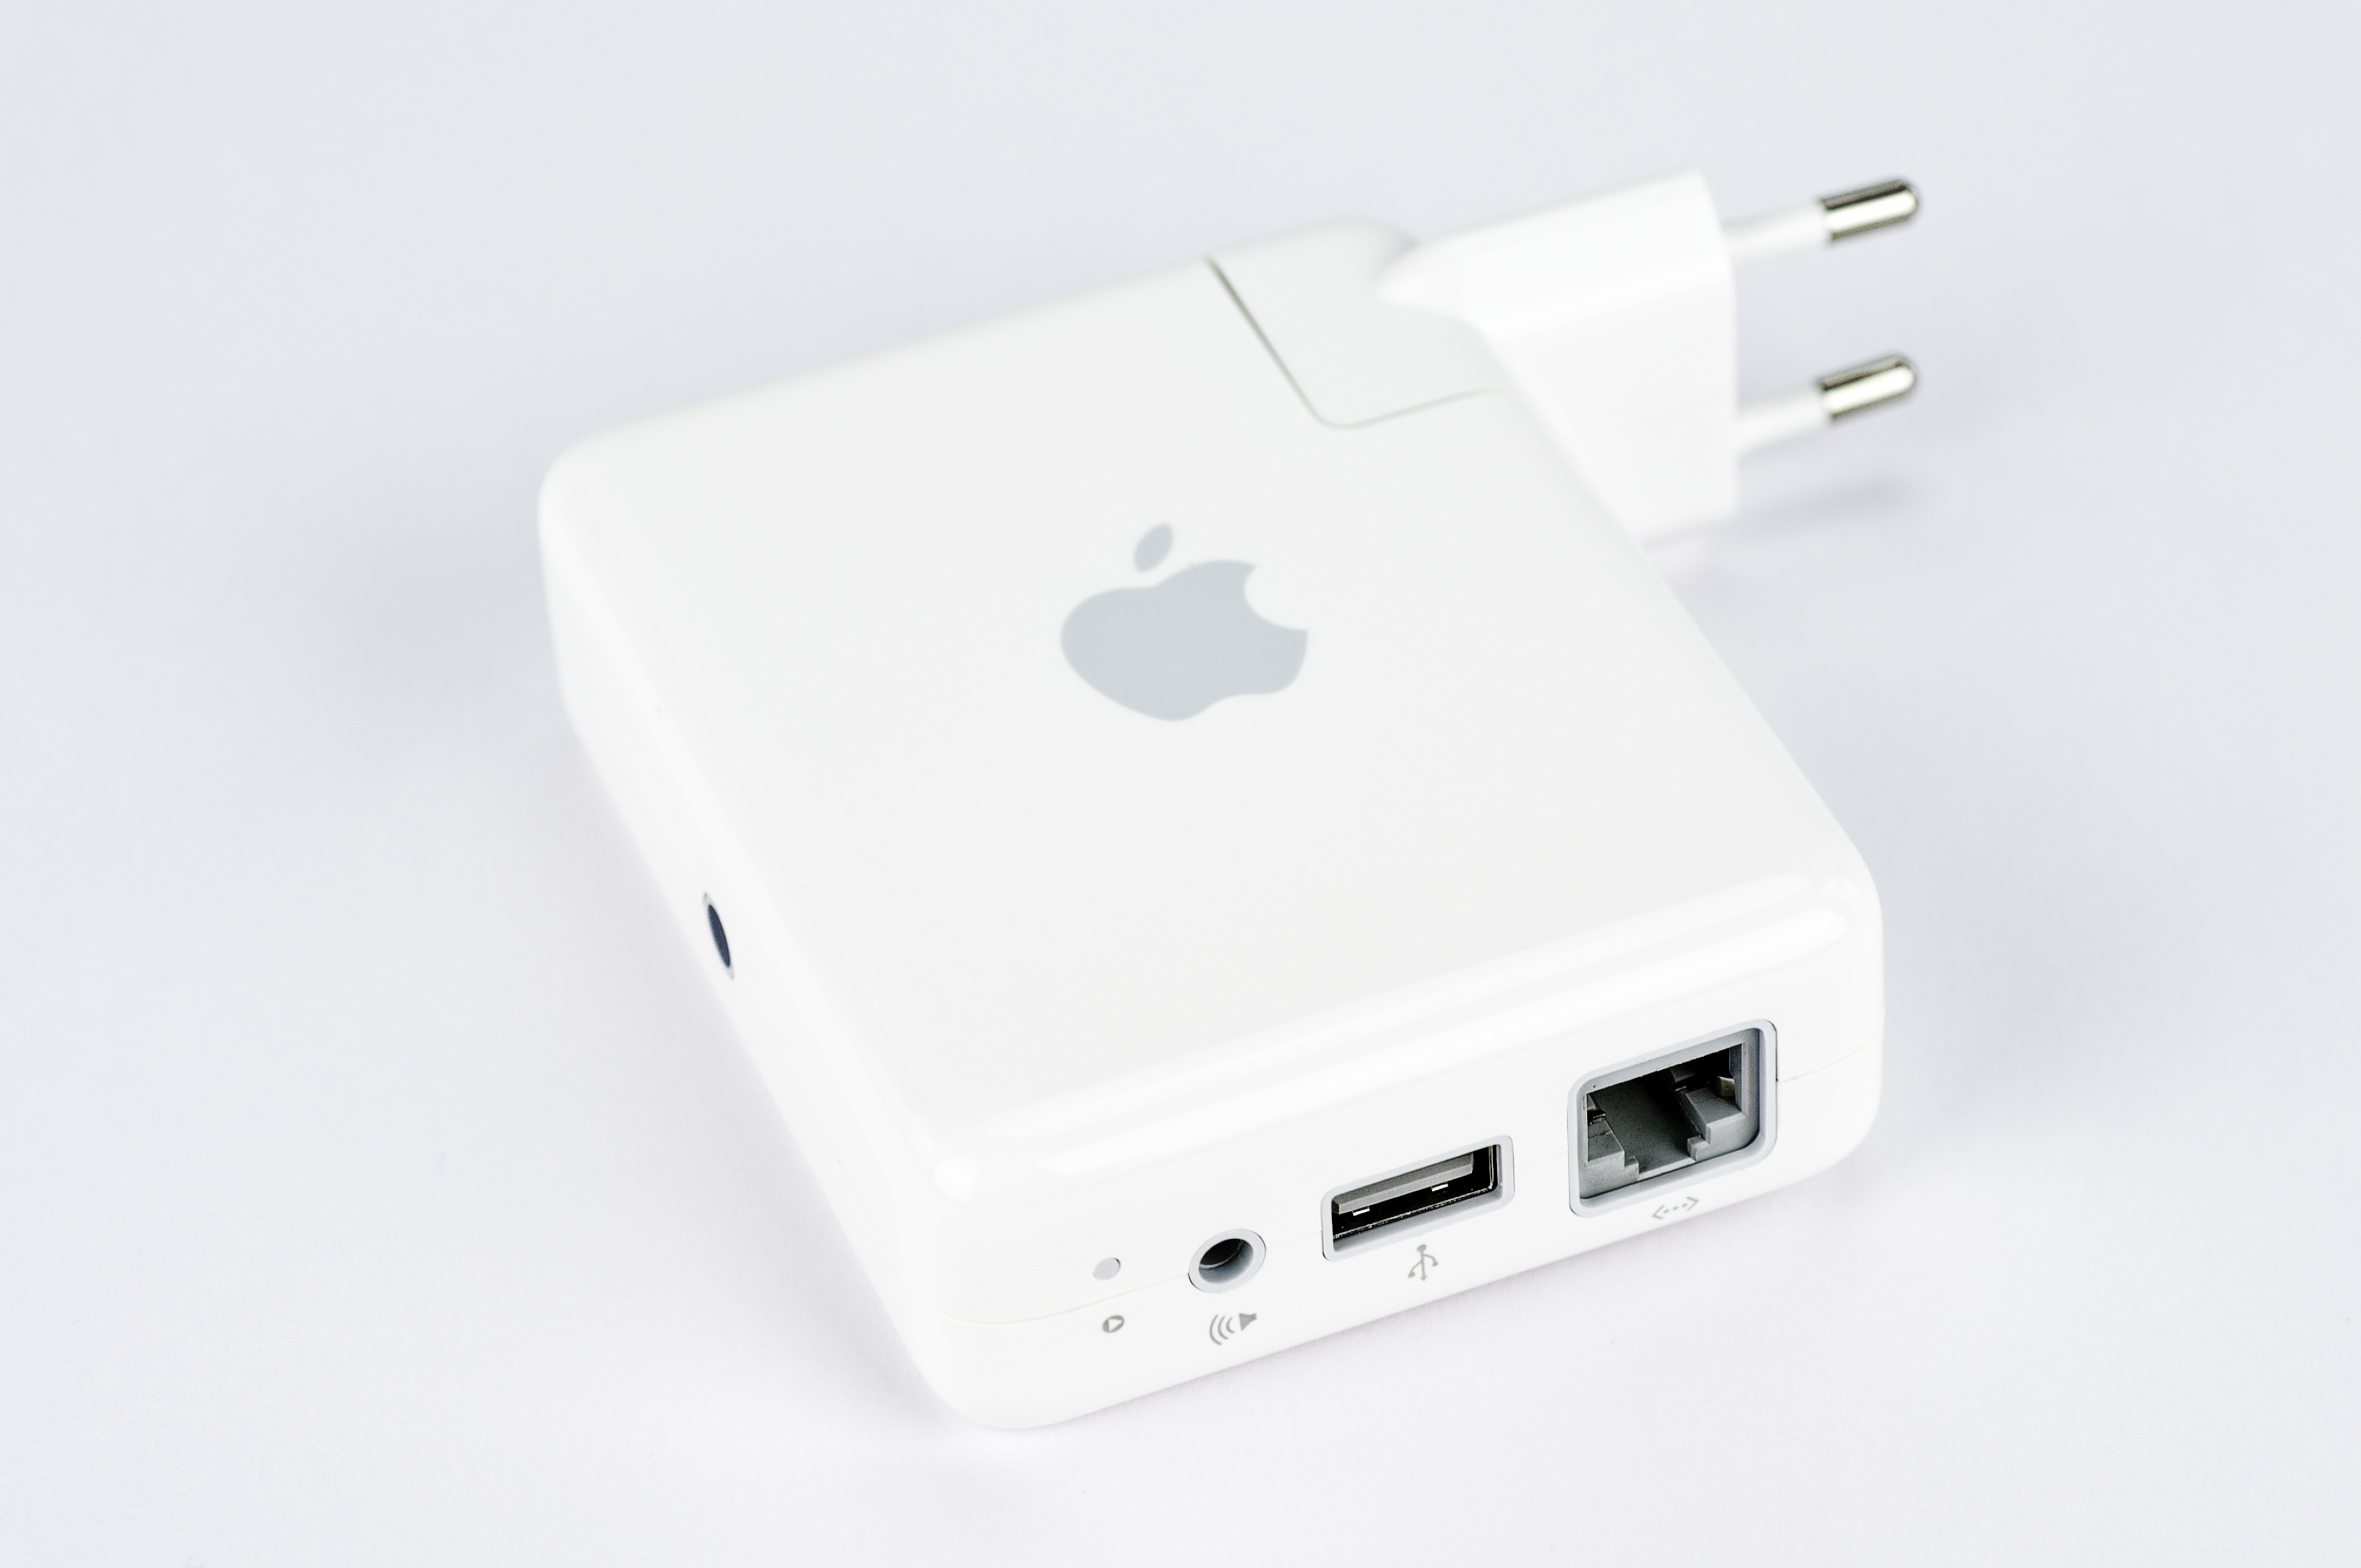 Svare Kondensere Tempel Referencing Apple WI-FI devices : Airport, Airport Extreme, Airport Express  and Airport Time Capsule - Freney.net